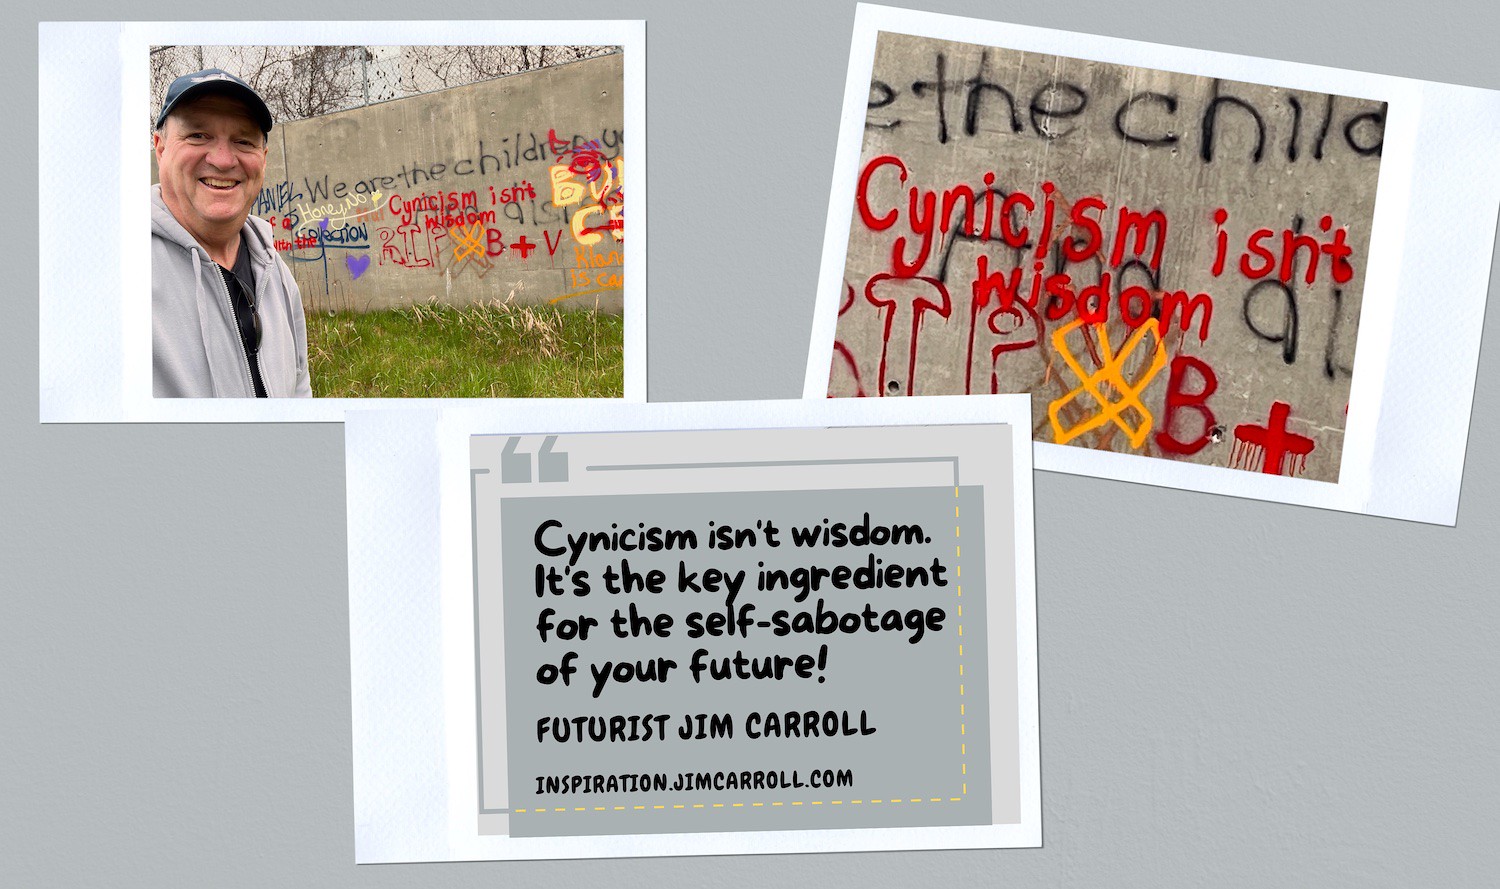 "Cynicism isn't wisdom. It's the key ingredient for the self-sabotage of your future!" - Futurist Jim Carroll